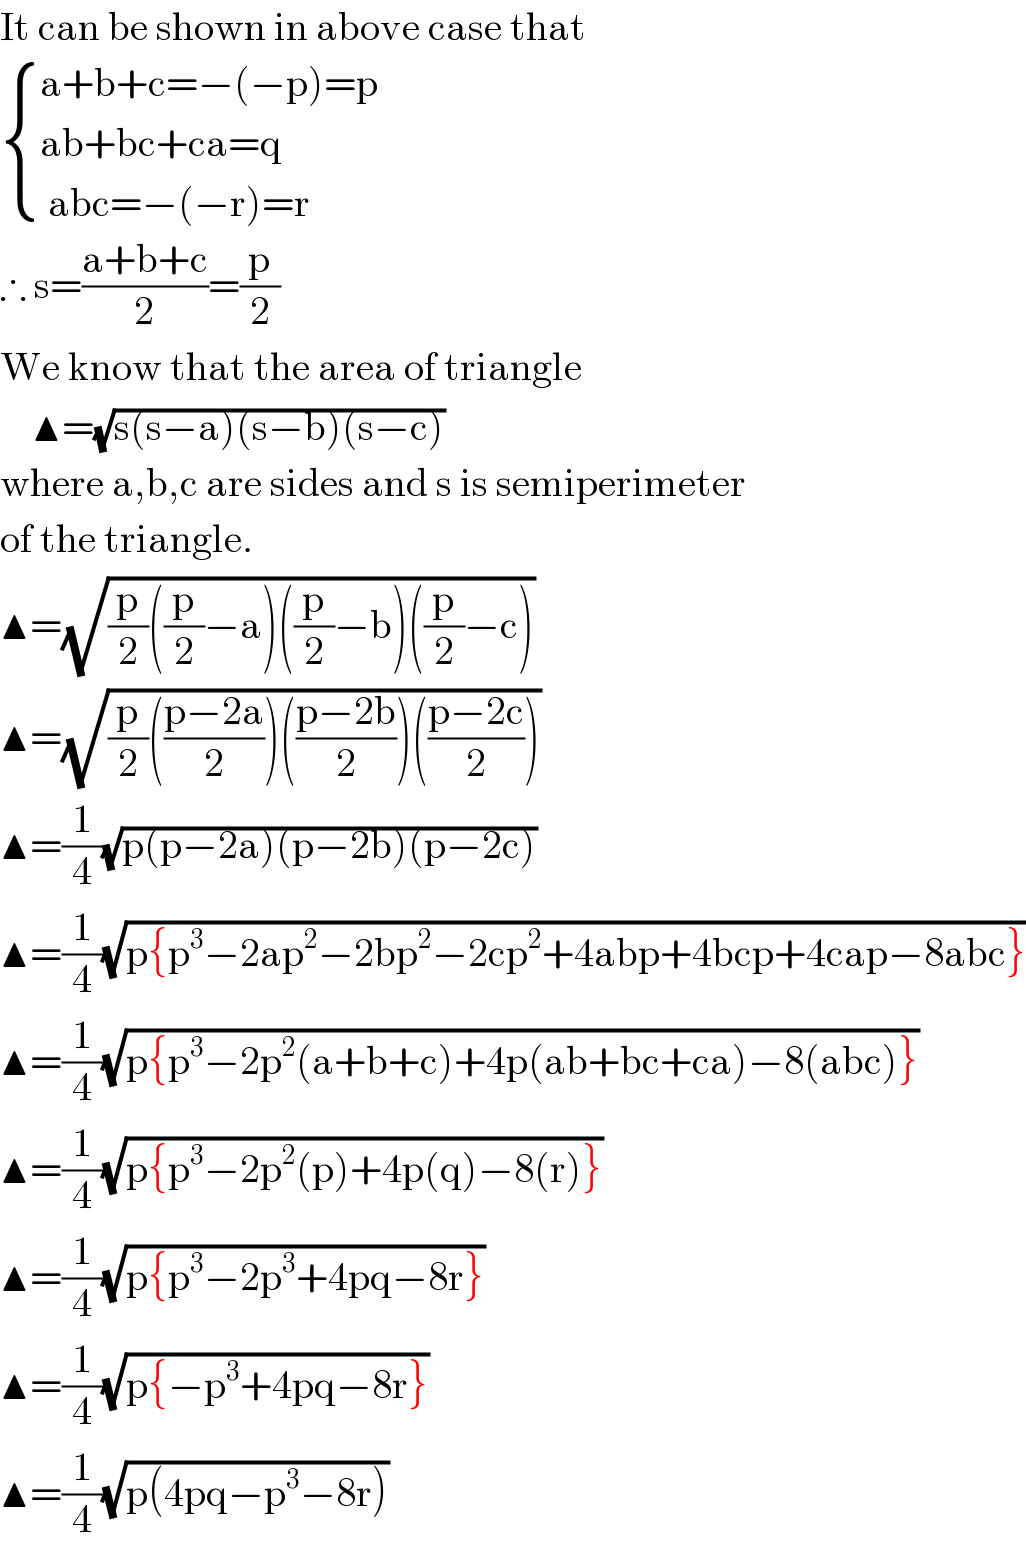 It can be shown in above case that   { ((a+b+c=−(−p)=p  )),((ab+bc+ca=q)),(( abc=−(−r)=r)) :}  ∴ s=((a+b+c)/2)=(p/2)  We know that the area of triangle      ▲=(√(s(s−a)(s−b)(s−c)))  where a,b,c are sides and s is semiperimeter  of the triangle.  ▲=(√((p/2)((p/2)−a)((p/2)−b)((p/2)−c)))  ▲=(√((p/2)(((p−2a)/2))(((p−2b)/2))(((p−2c)/2))))  ▲=(1/4)(√(p(p−2a)(p−2b)(p−2c)))  ▲=(1/4)(√(p{p^3 −2ap^2 −2bp^2 −2cp^2 +4abp+4bcp+4cap−8abc}))  ▲=(1/4)(√(p{p^3 −2p^2 (a+b+c)+4p(ab+bc+ca)−8(abc)}))  ▲=(1/4)(√(p{p^3 −2p^2 (p)+4p(q)−8(r)}))  ▲=(1/4)(√(p{p^3 −2p^3 +4pq−8r}))  ▲=(1/4)(√(p{−p^3 +4pq−8r}))  ▲=(1/4)(√(p(4pq−p^3 −8r)))  